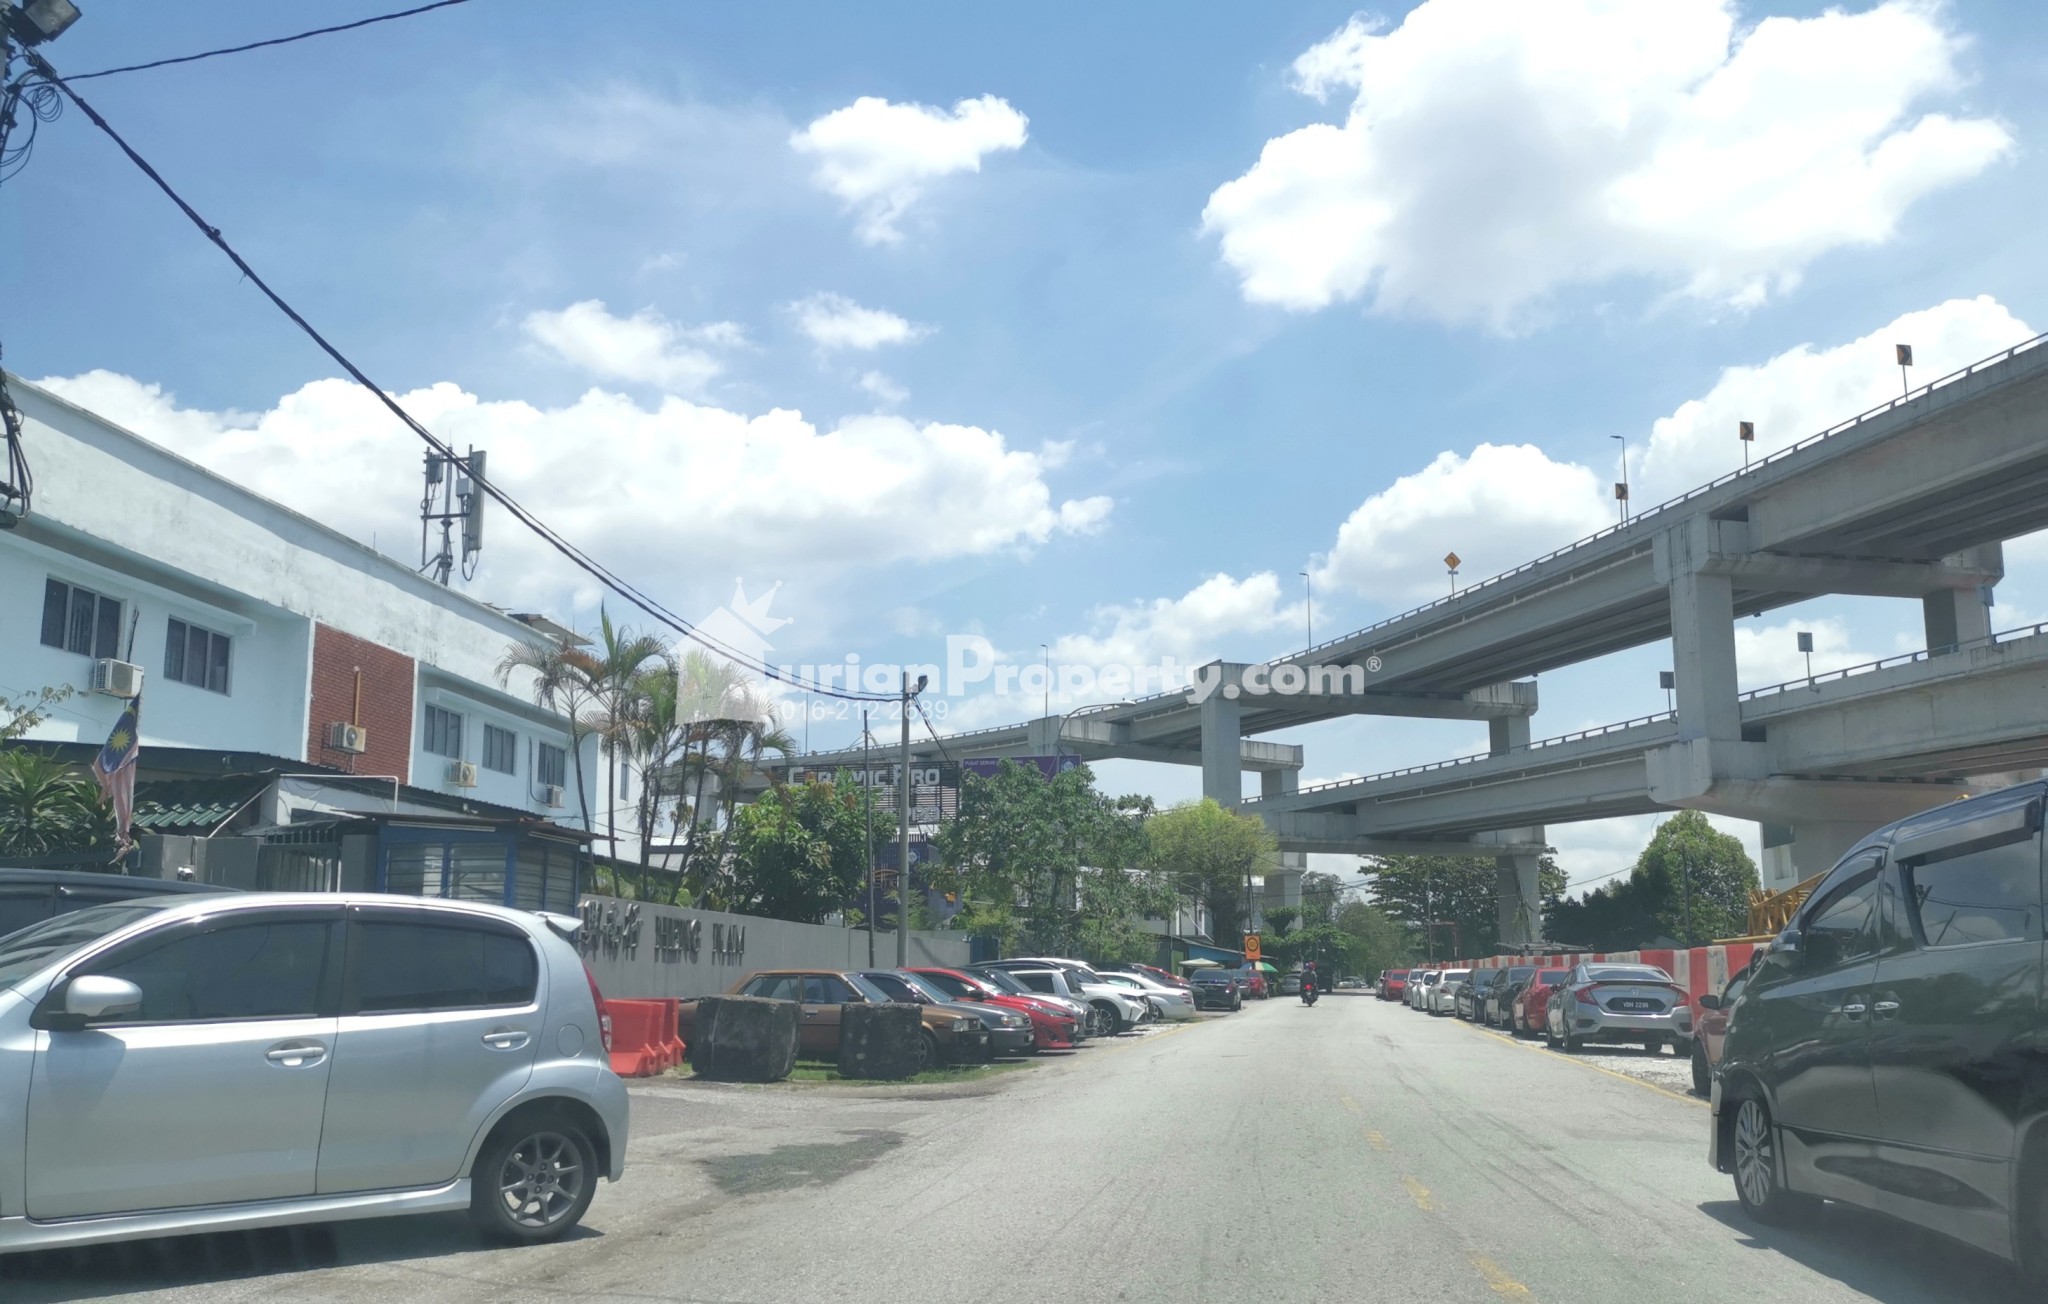 Industrial Land For Sale at Sungai Besi